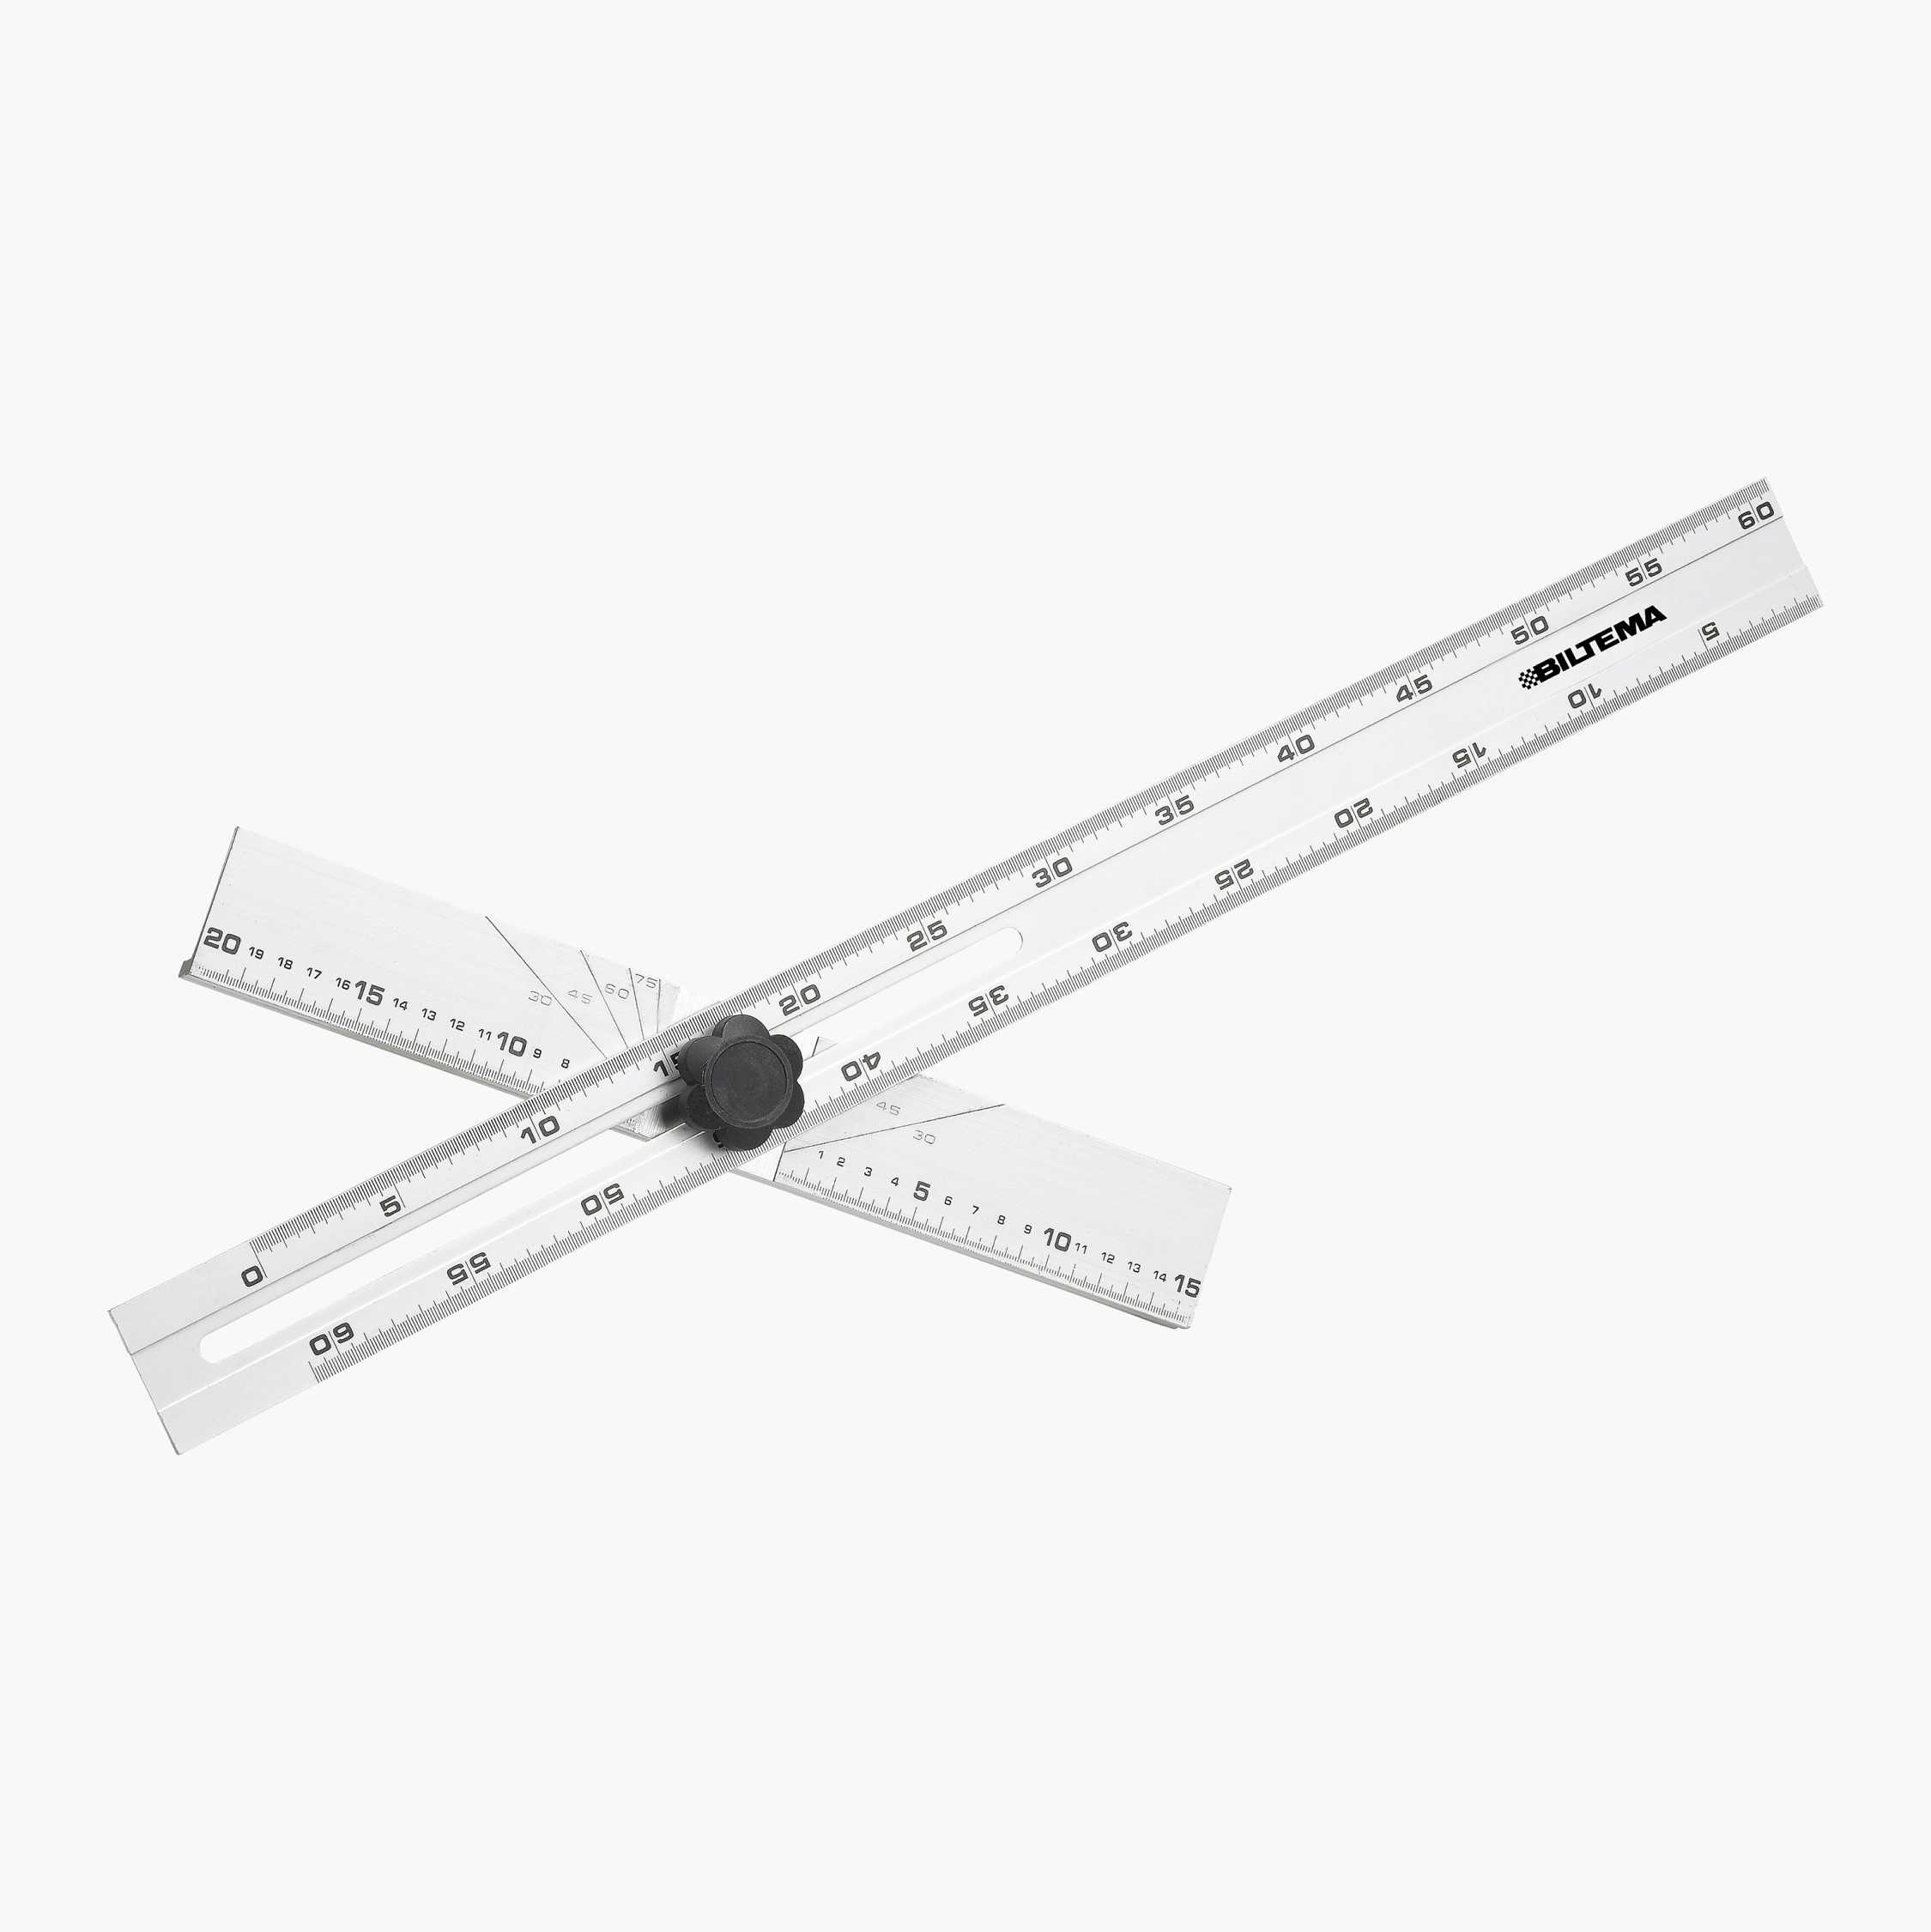 Amtech 24-inch Adjustable T-square 